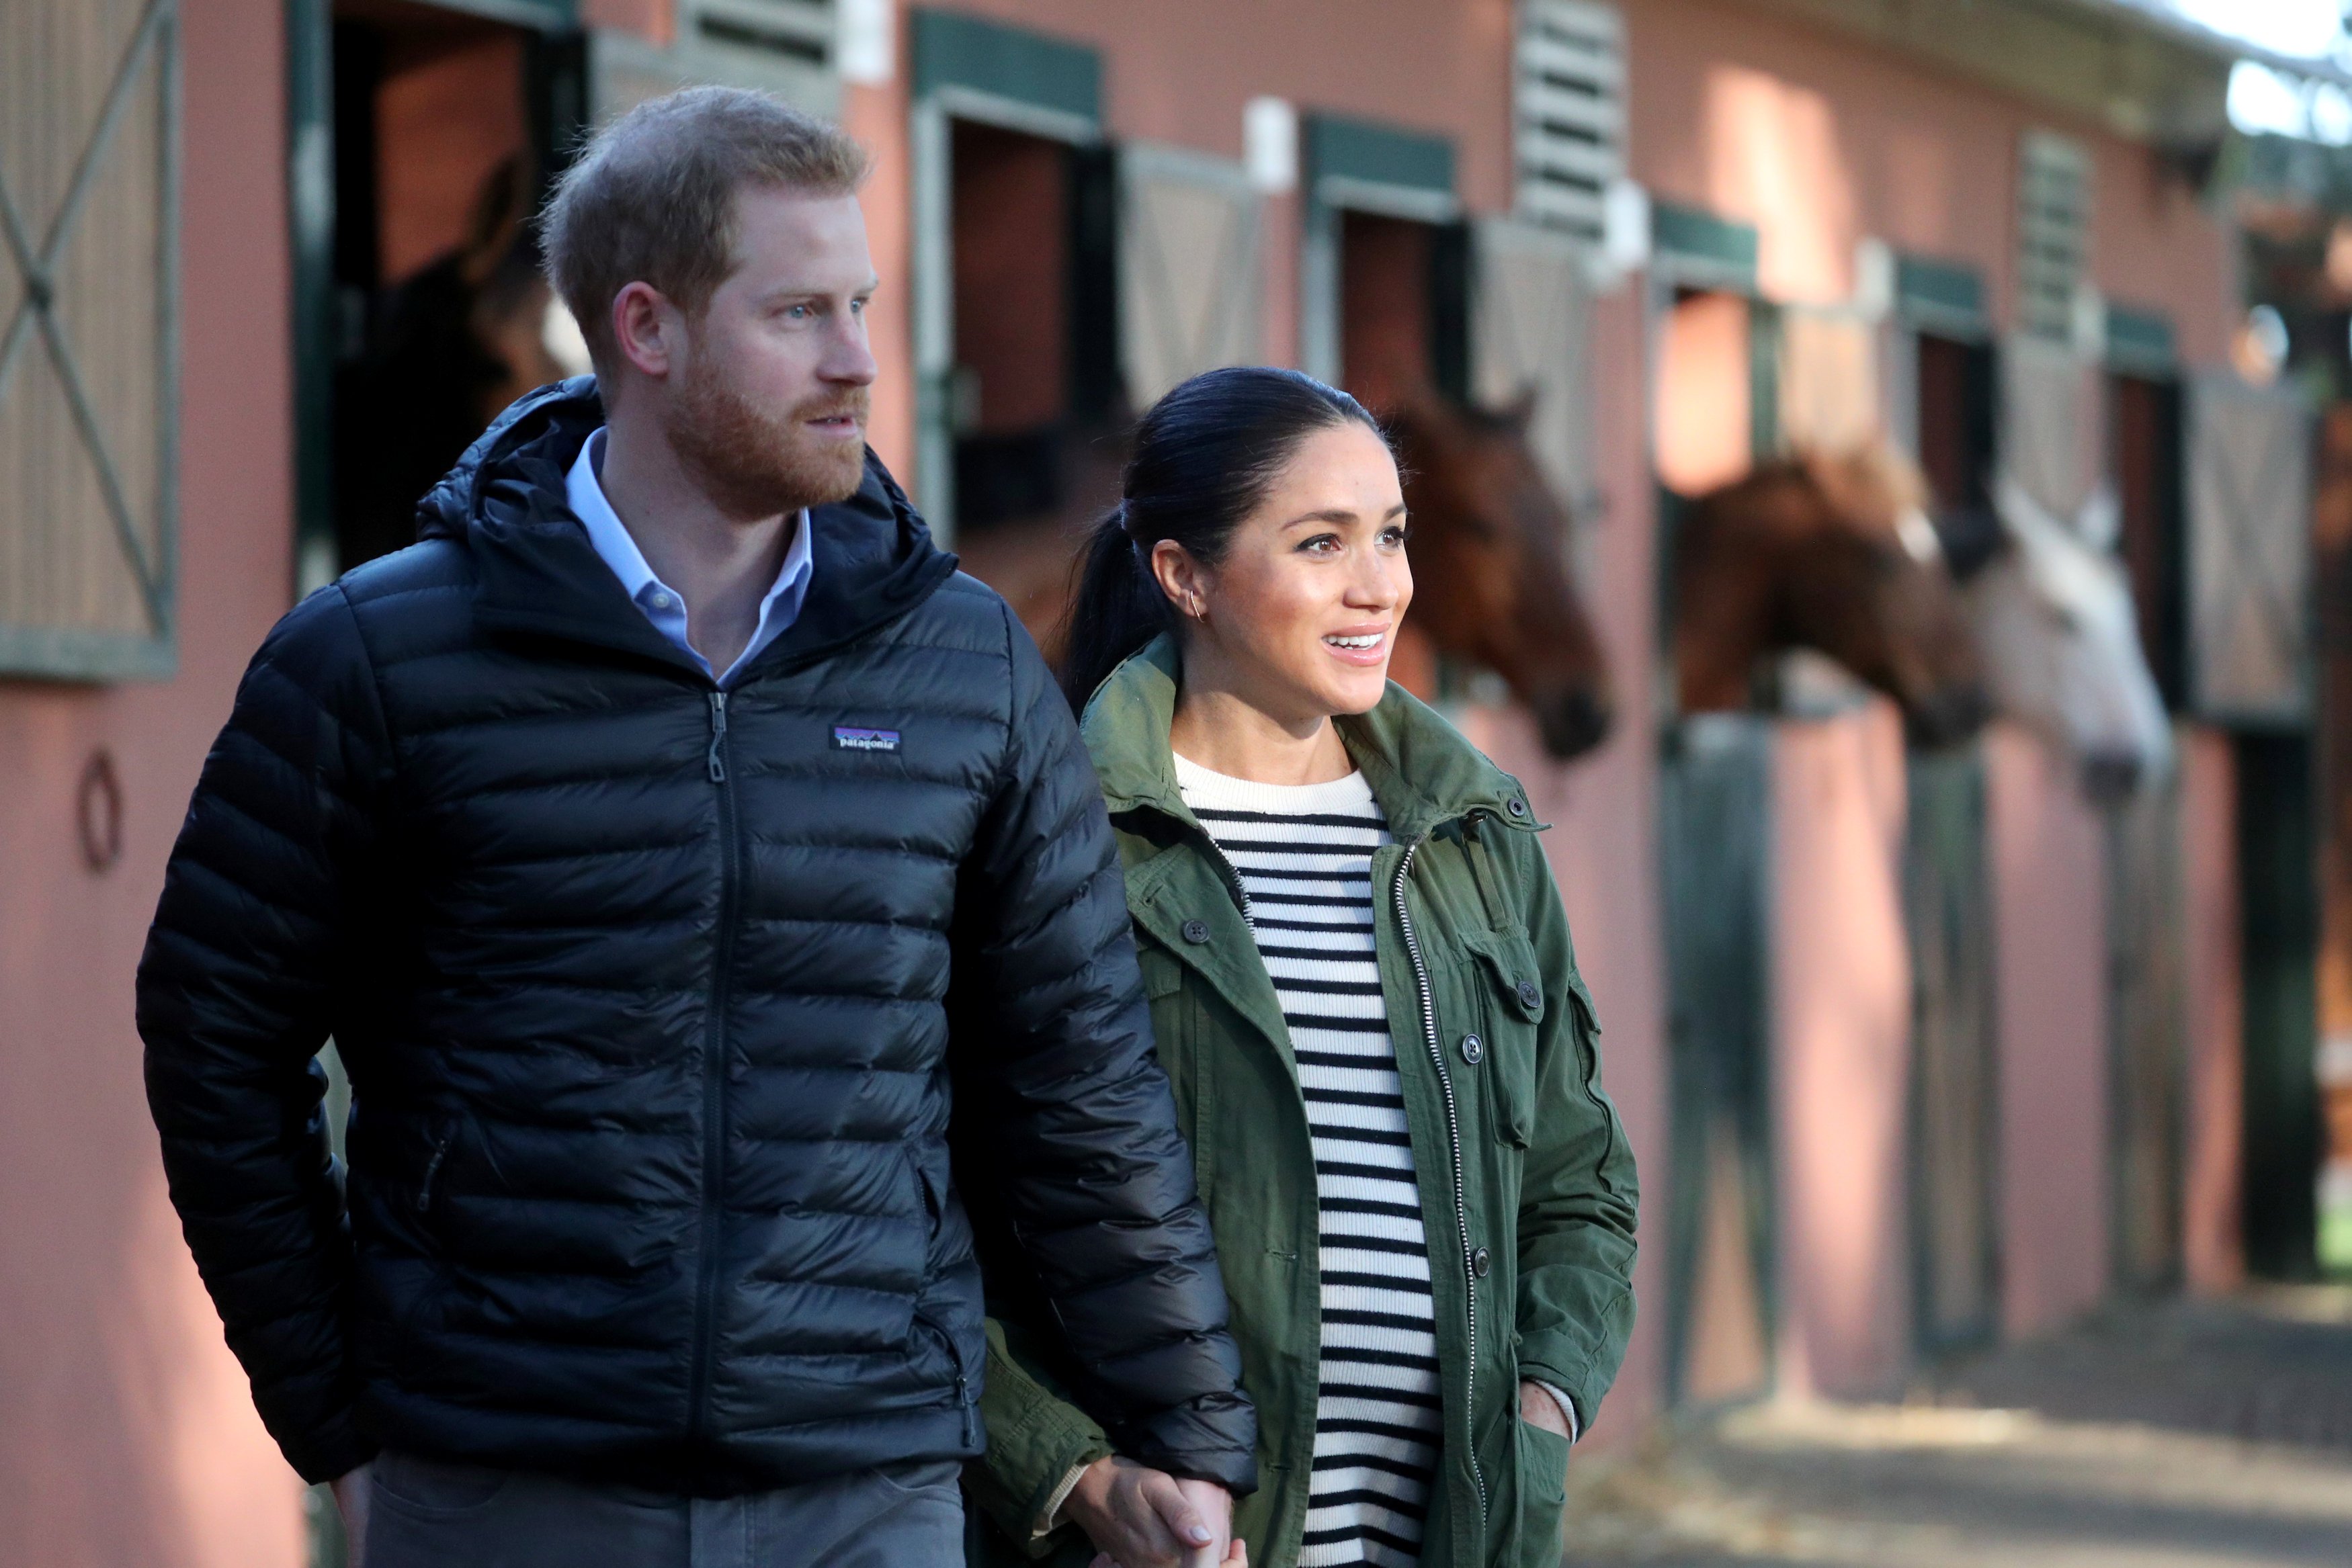 Prince Harry and Meghan Markle on a visit to Morocco in February 2019. | Source: Getty Images